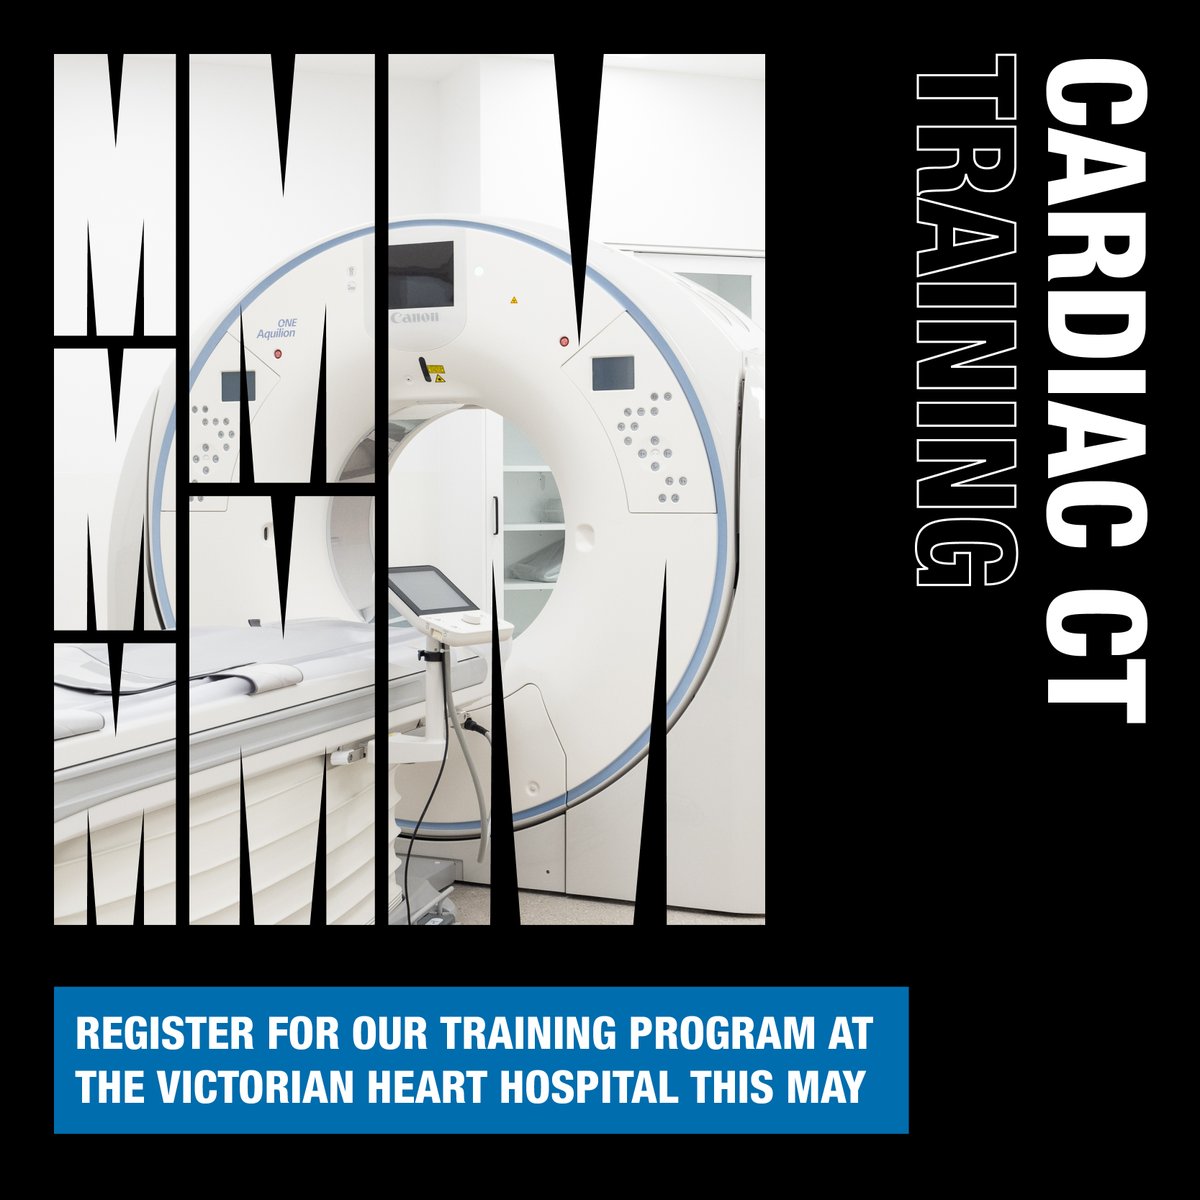 Master your knowledge of Cardiac CT! Join us at the Victorian Heart Hospital this May for an immersive four or six-day course on cardiac CT imaging. Experience live cases on the Canon Medical 320-slice Aquilion ONE PRISM Edition CT scanner. Register now: bit.ly/MonashCardiacCT